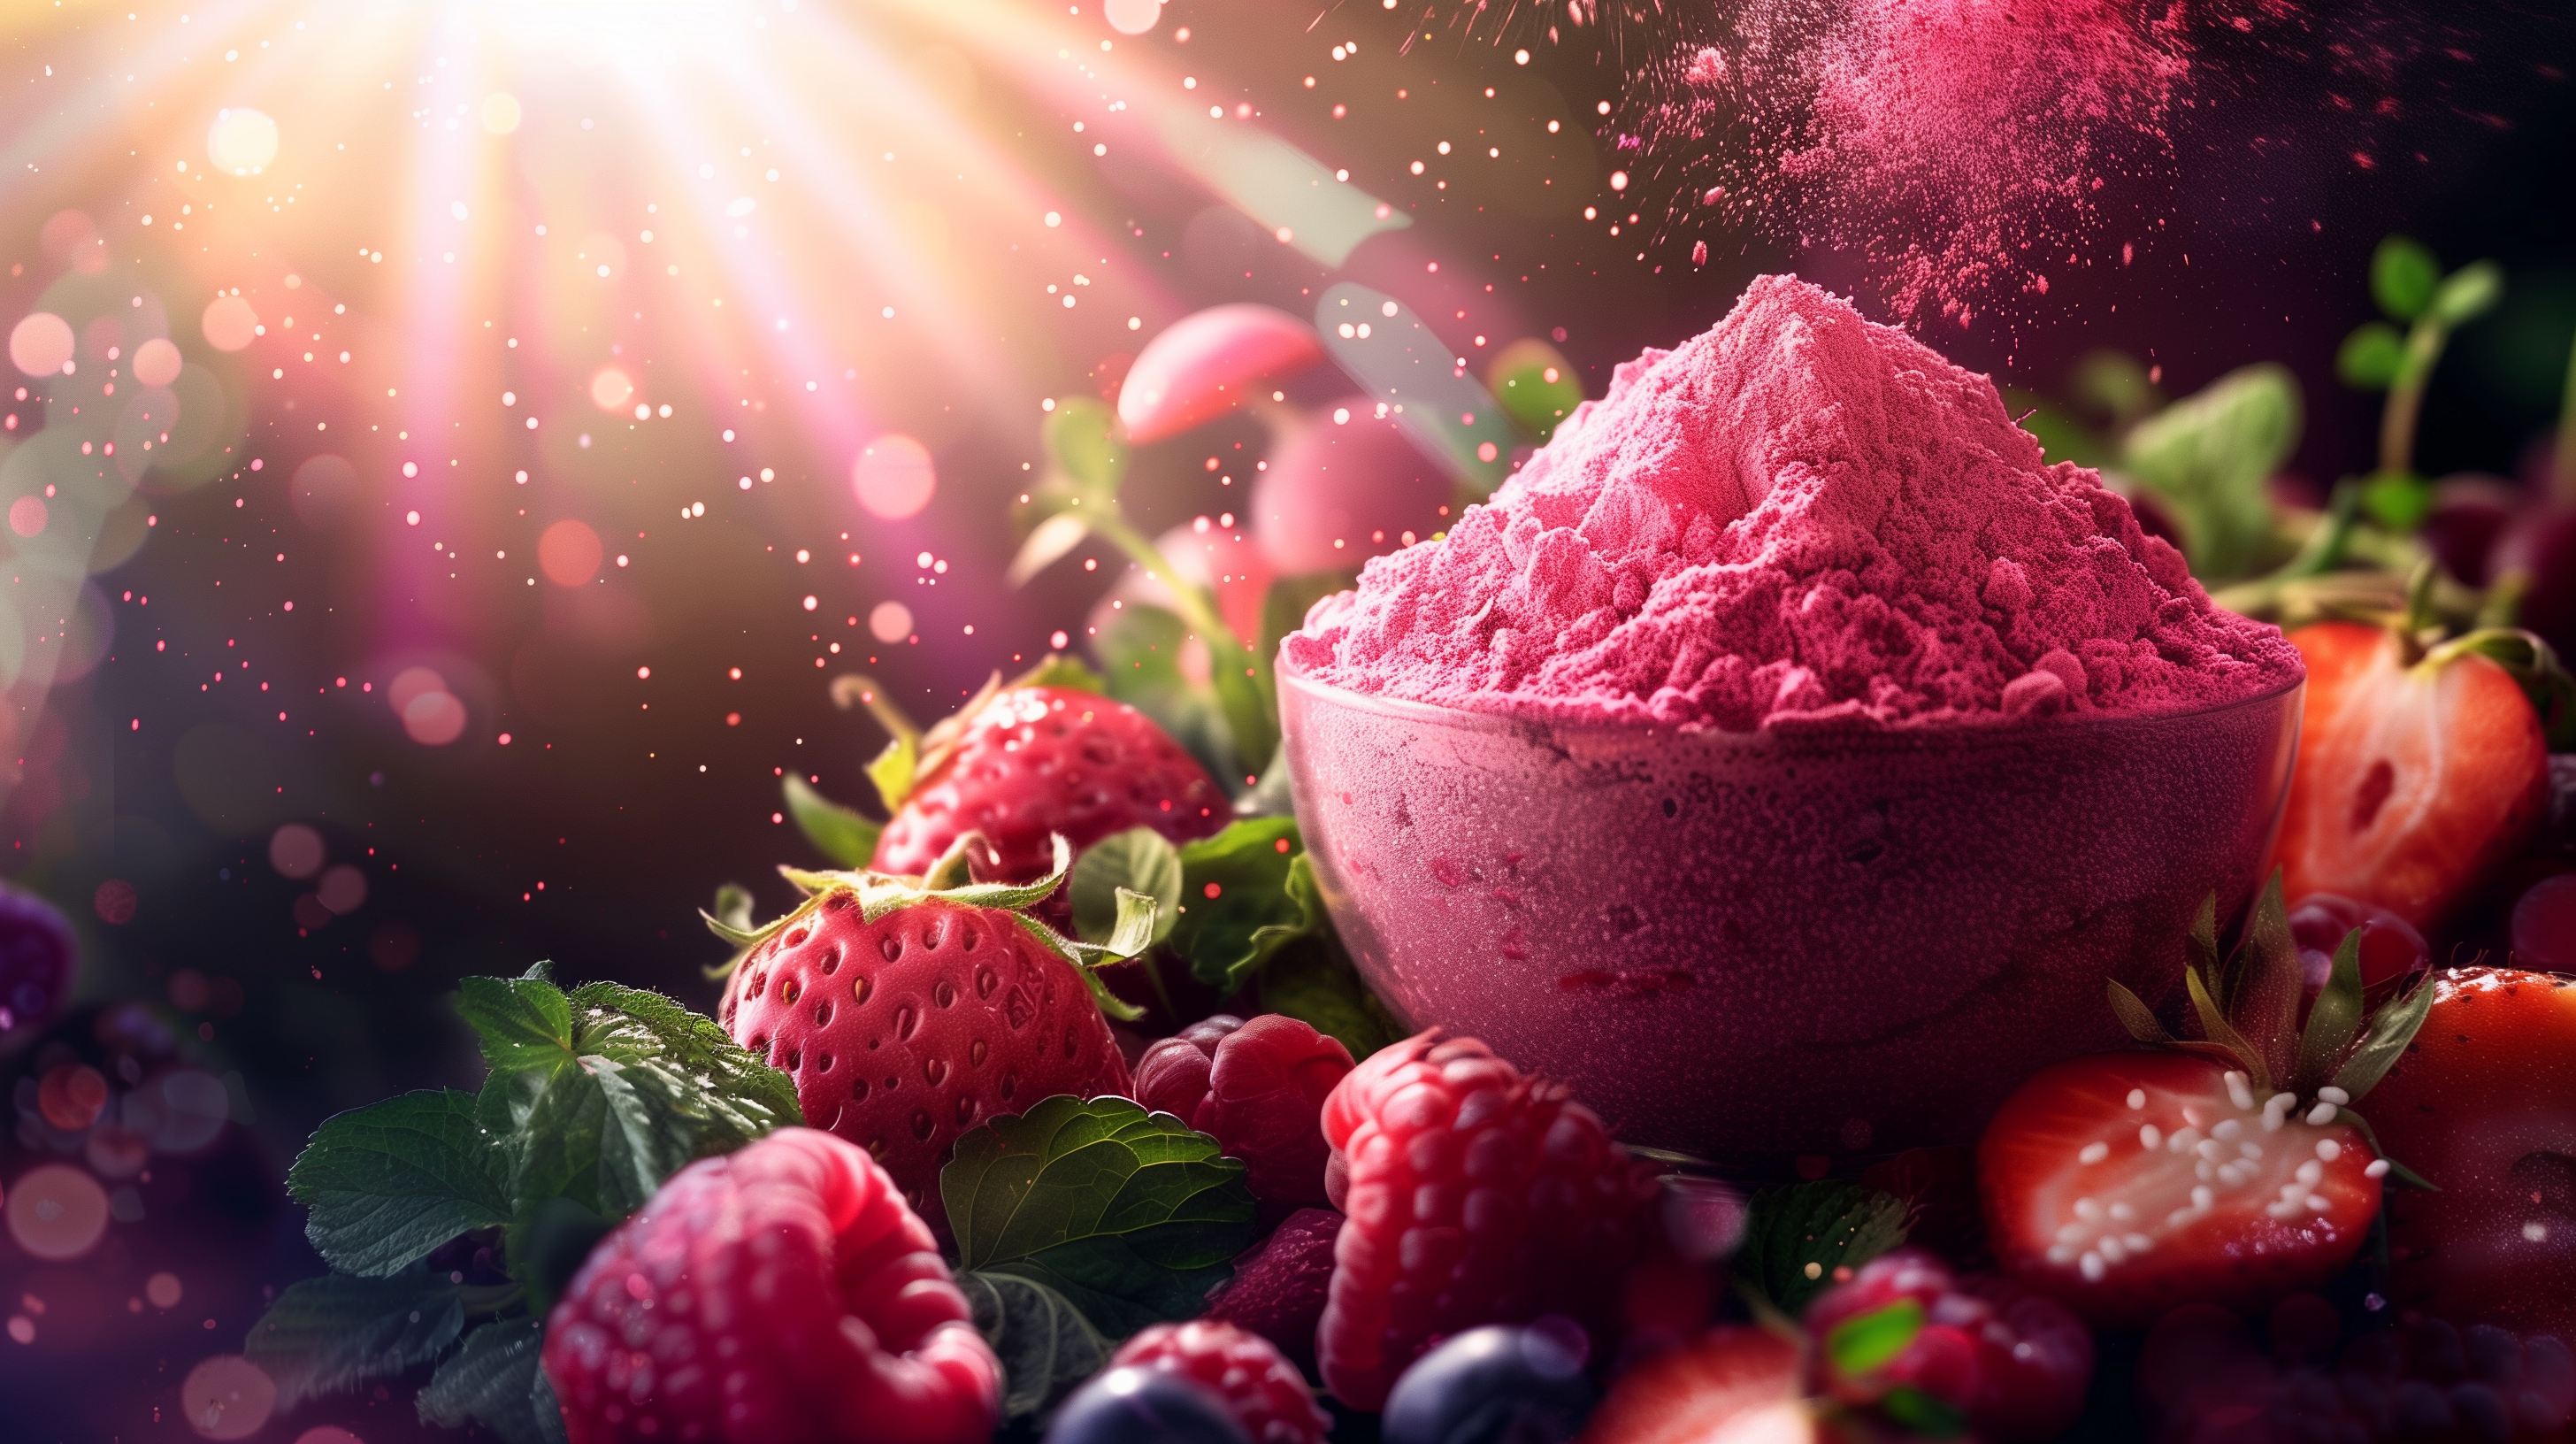 powdered supplement against a background of its key ingredients: beets, acai berries, raspberries, and strawberries